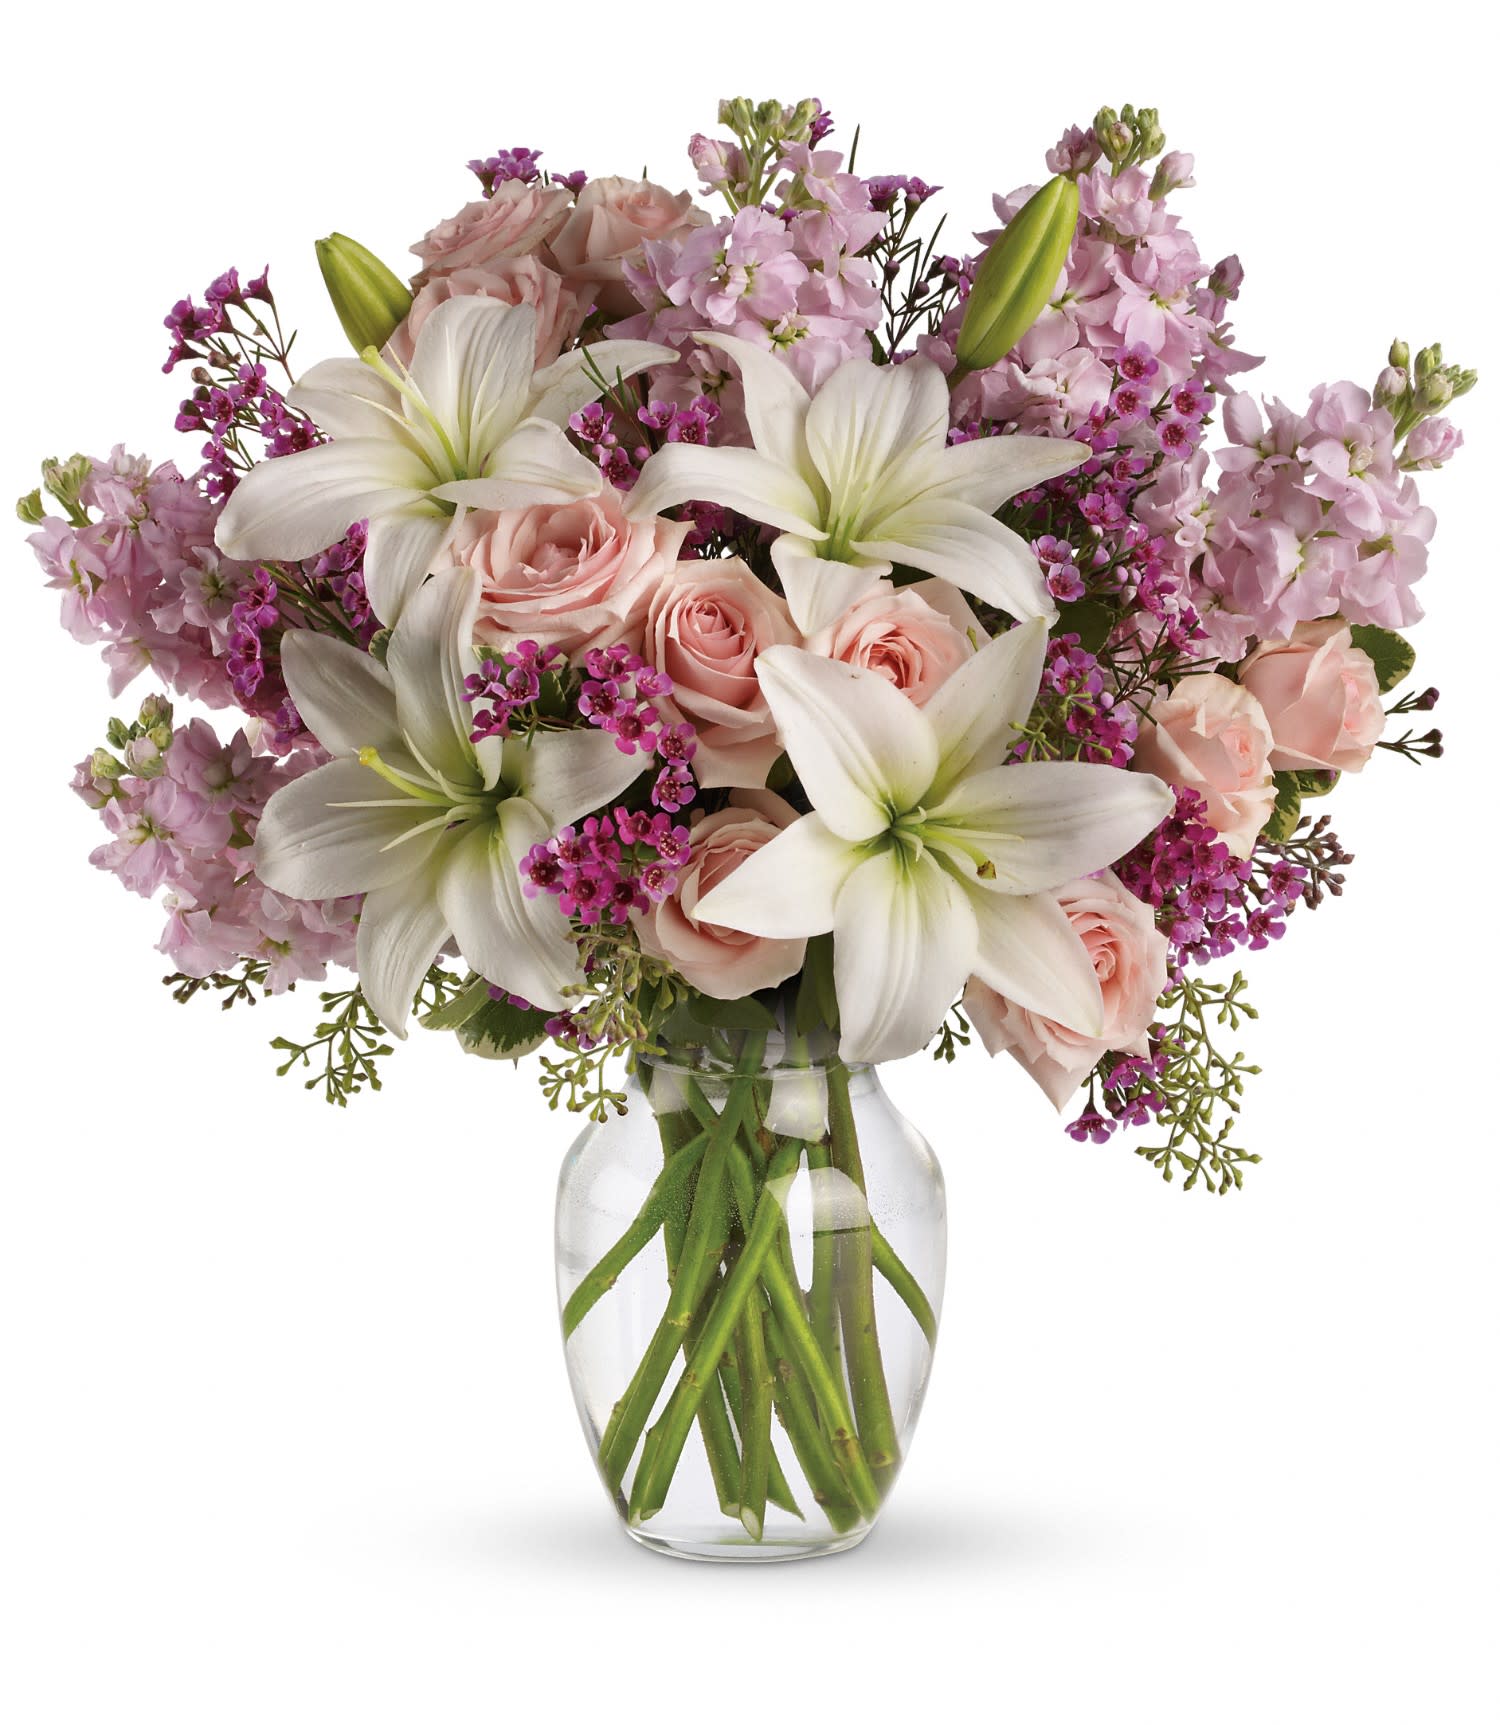 Teleflora's Blossoming Romance - Love is in the air. Or if it isn't, it will be when you surprise her with a gorgeous array of light pink spray roses, fragrant white lilies and other favorites in a sparkling glass vase. You know when she'll love it the most? When it's a total surprise.